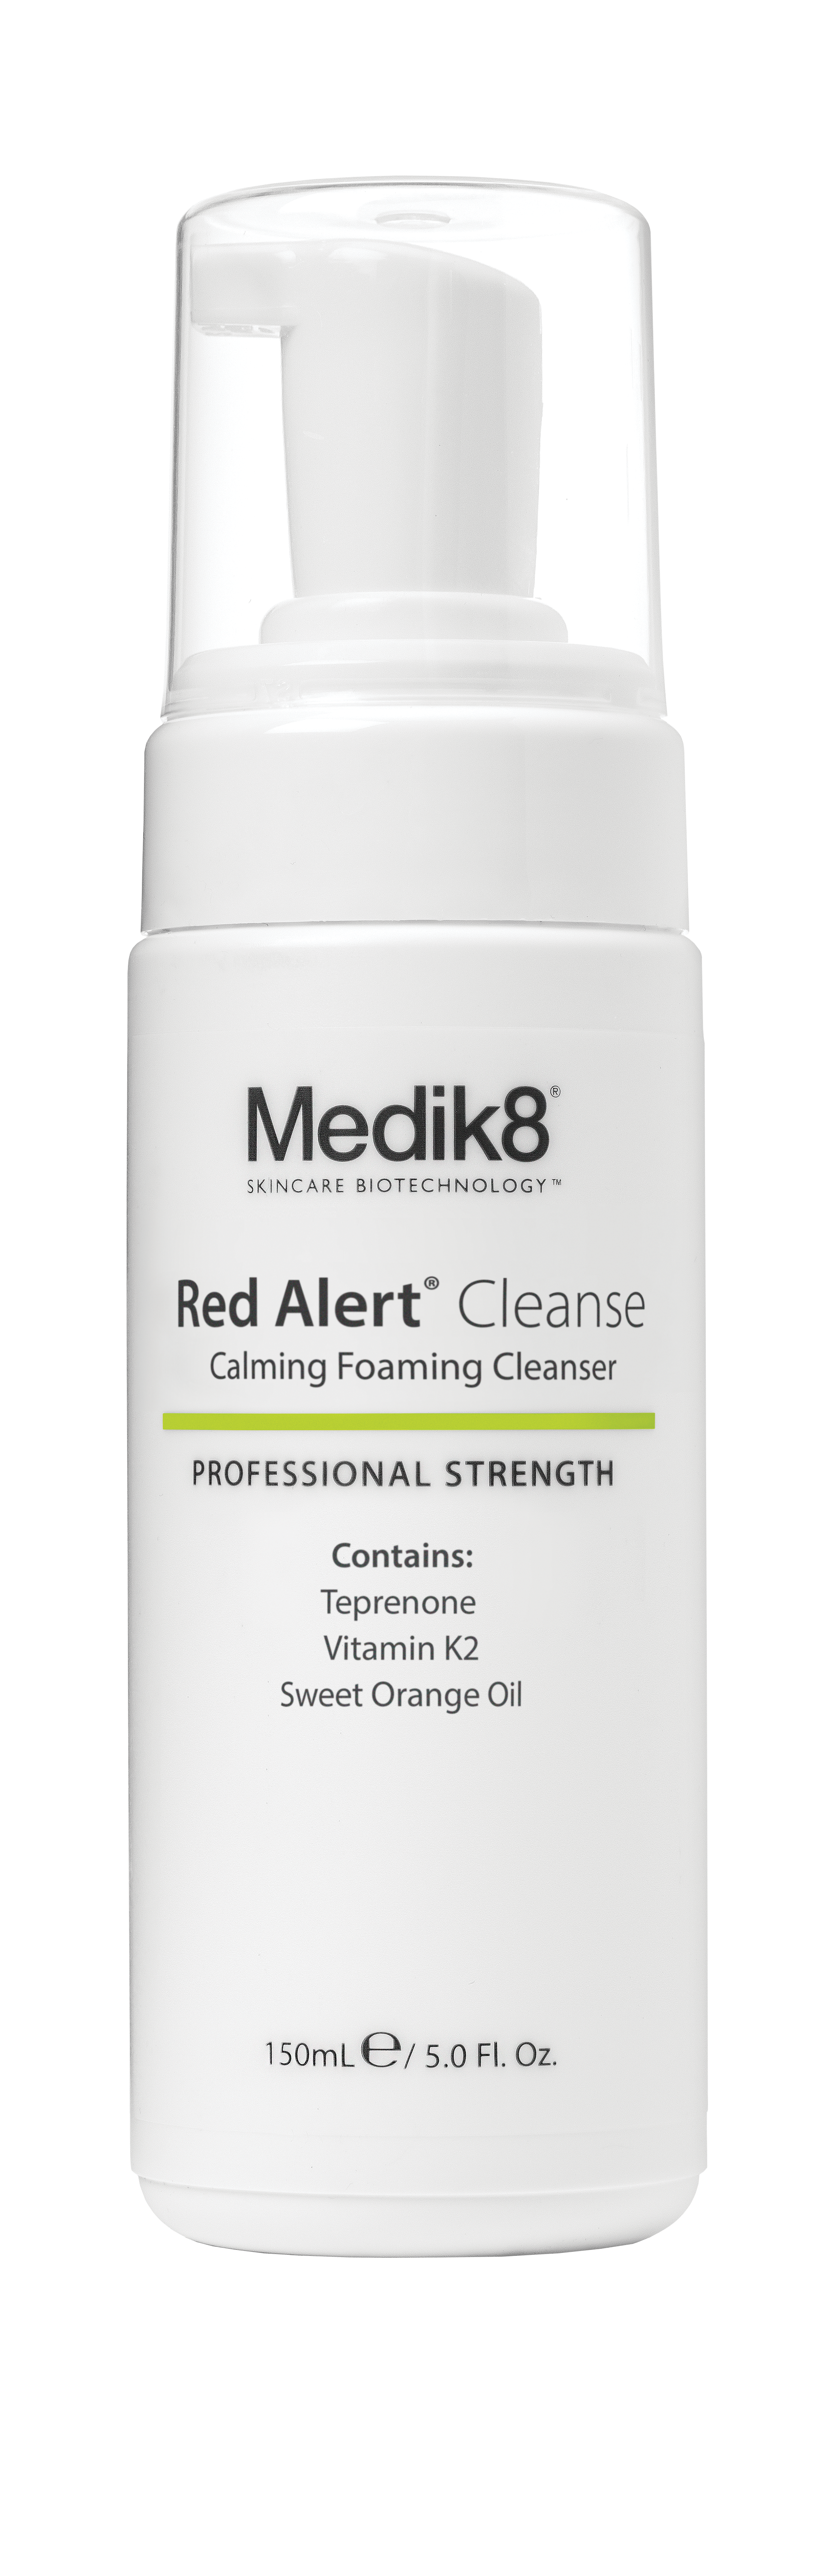 Red Alert Cleanse_product_noreflection